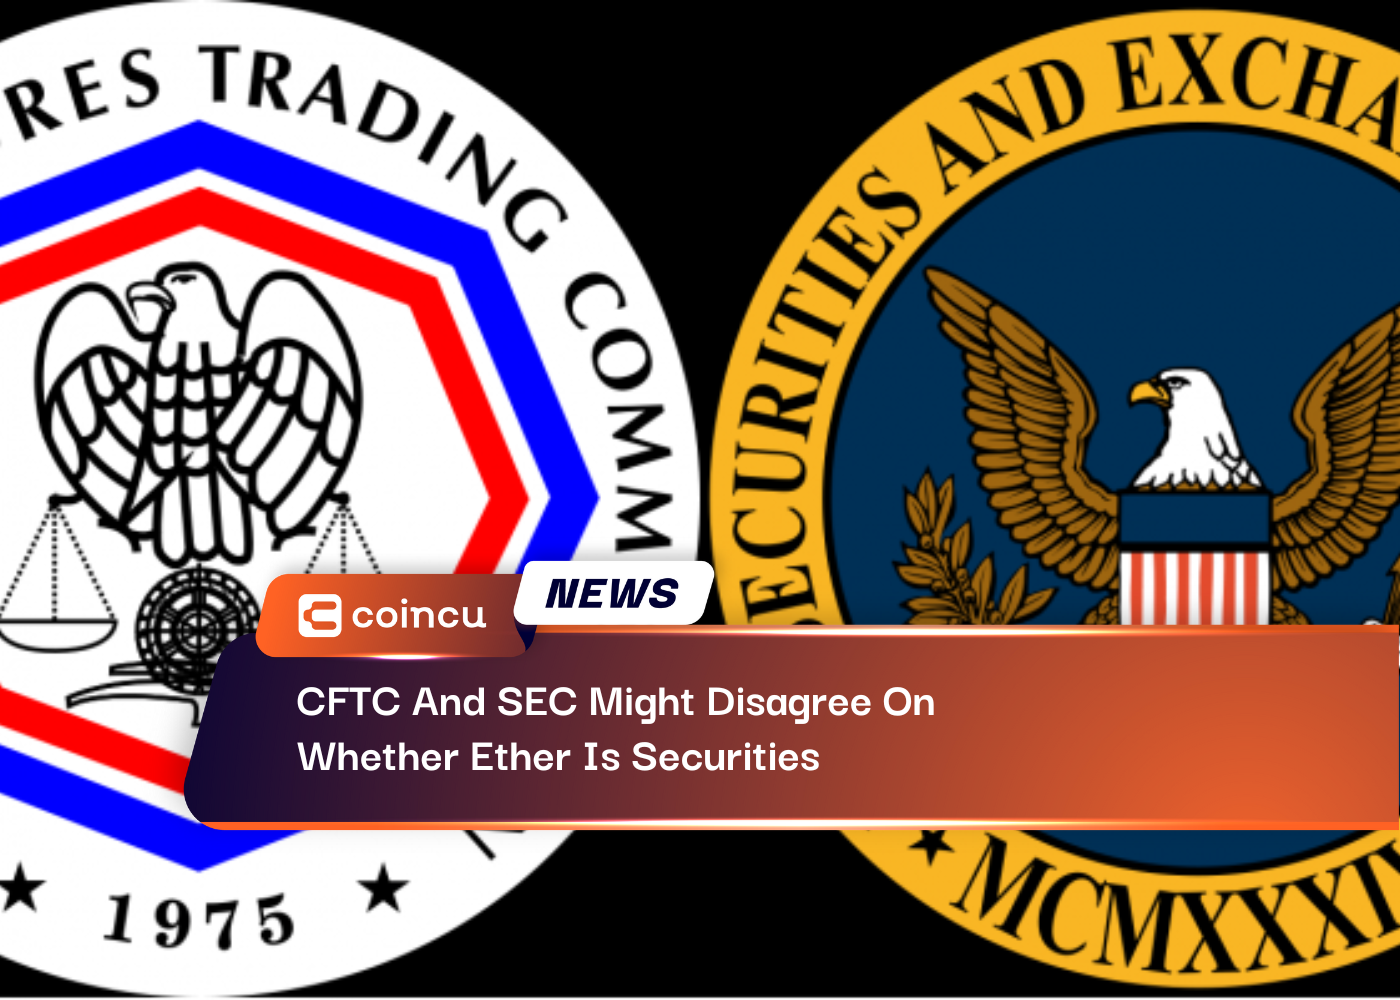 CFTC And SEC Might Disagree On